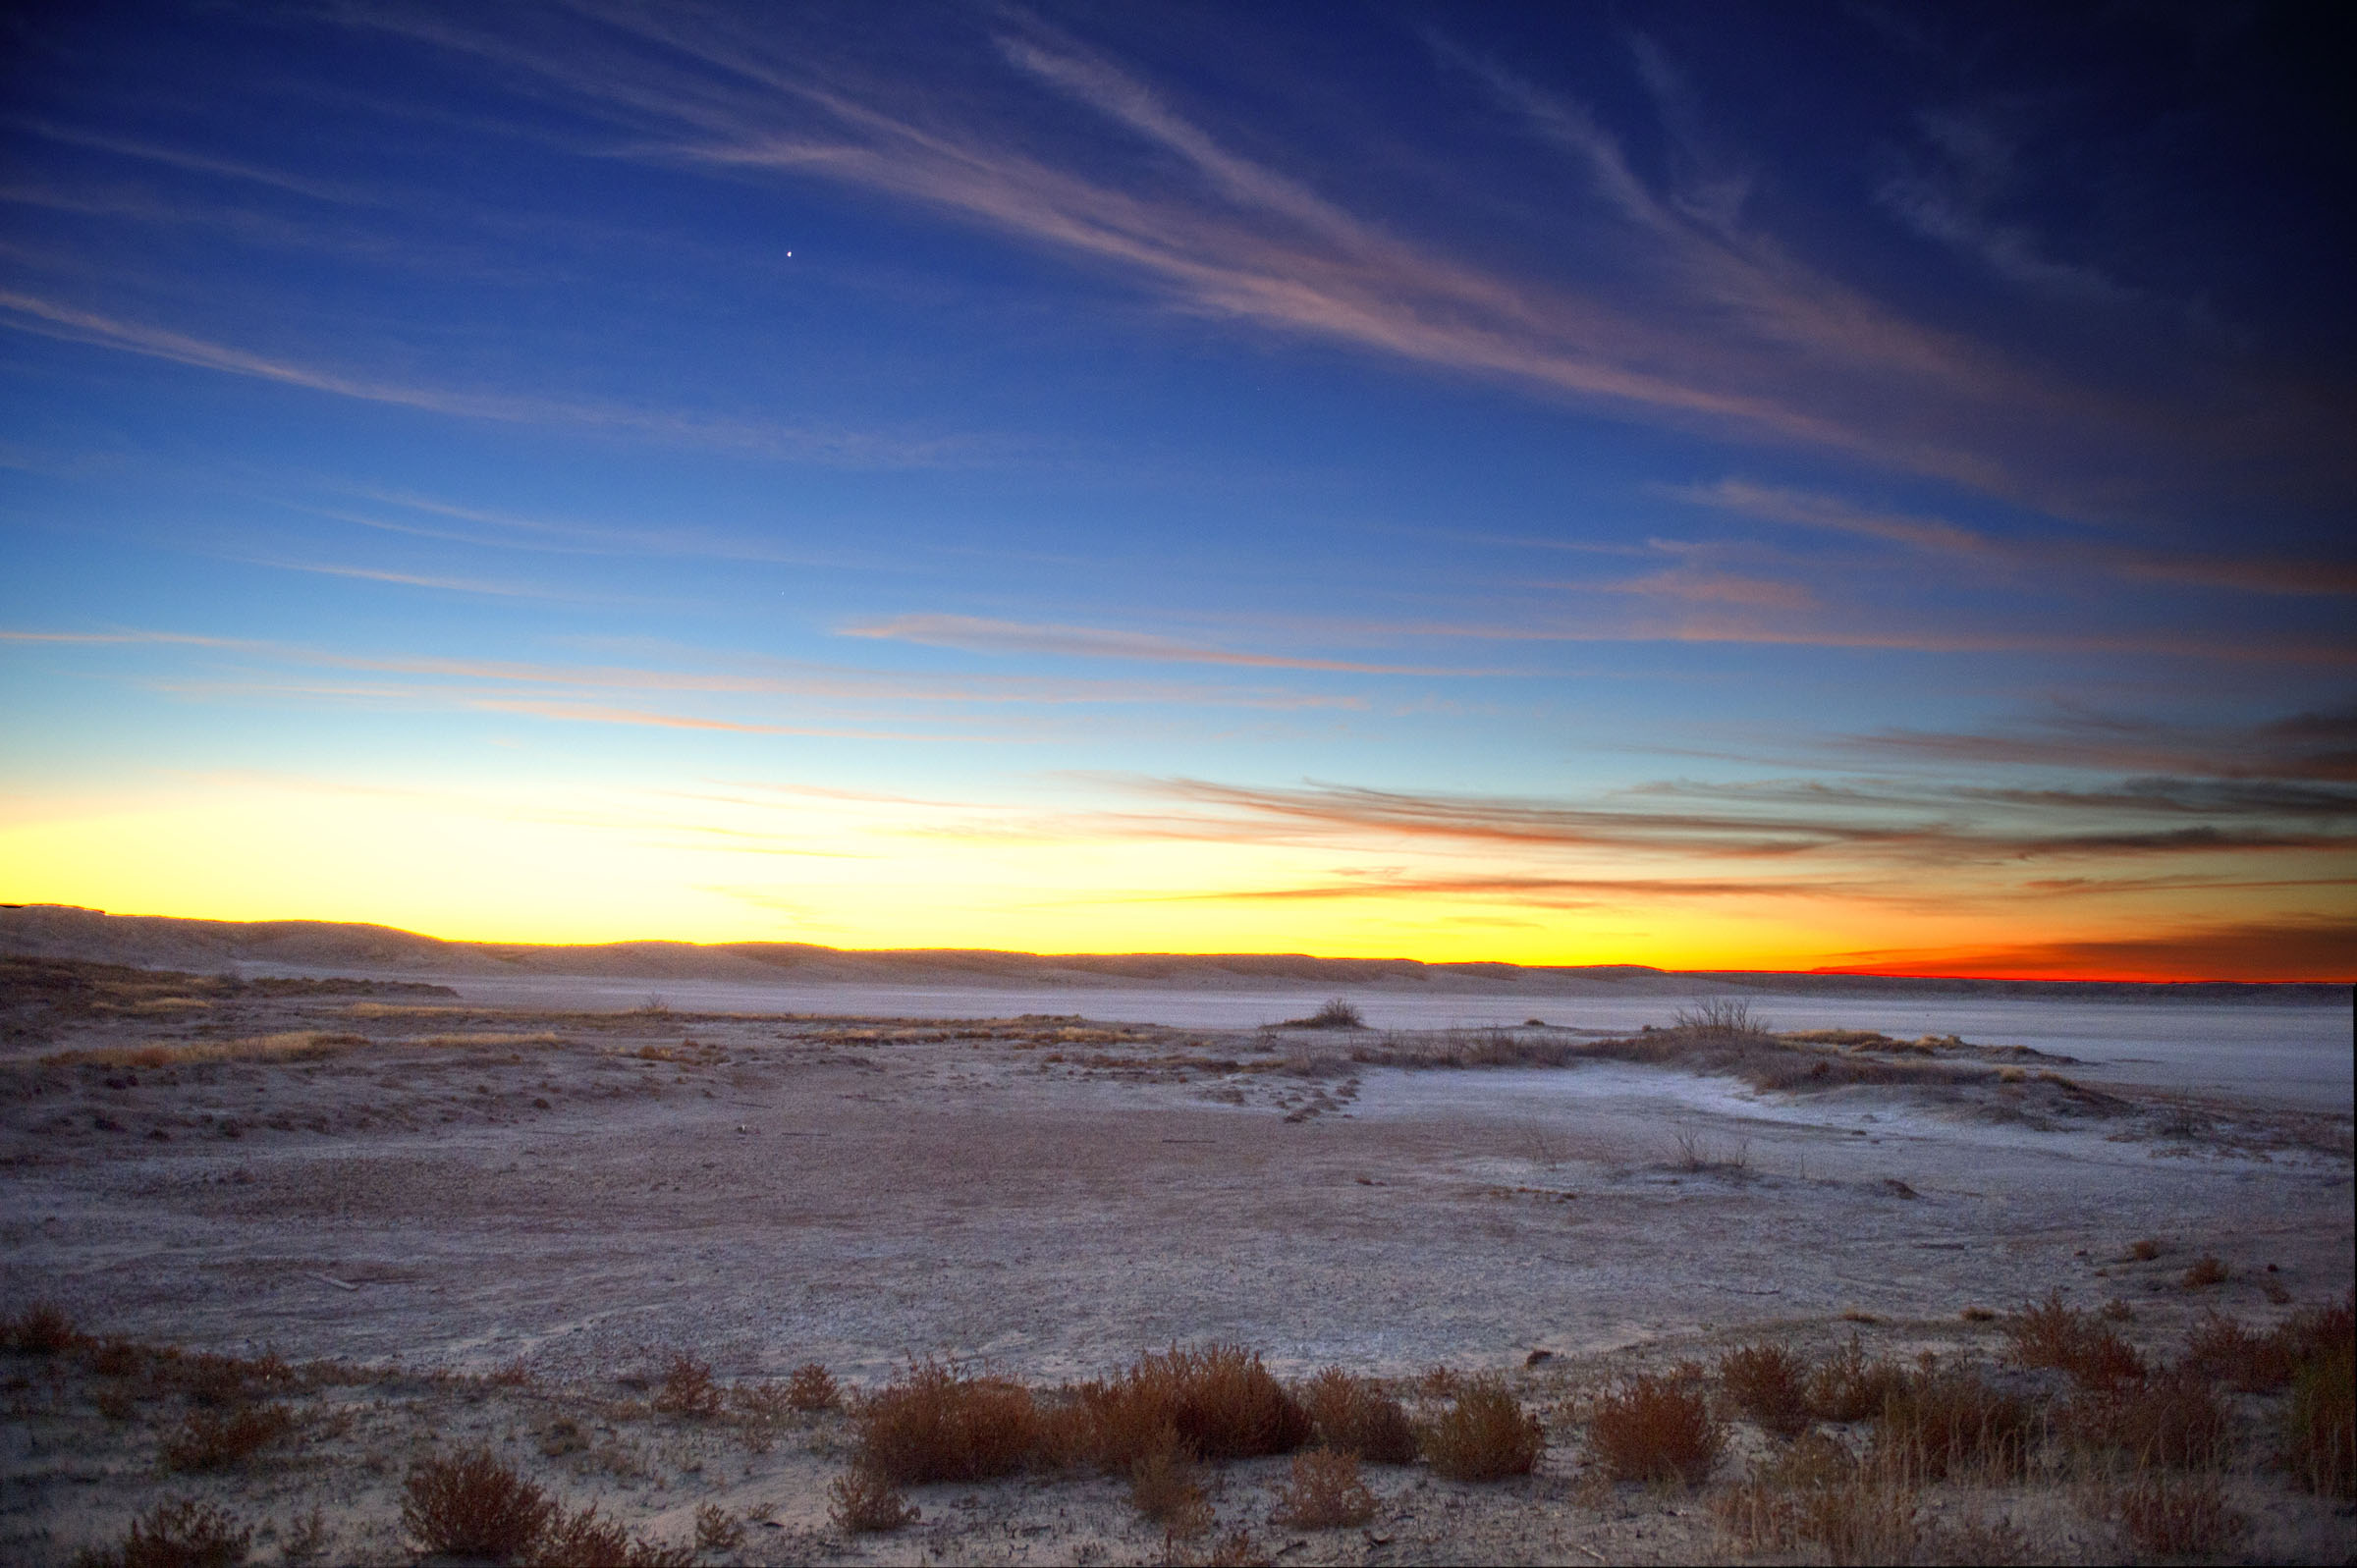 A sweeping desert landscape with a blue to orange sunset.